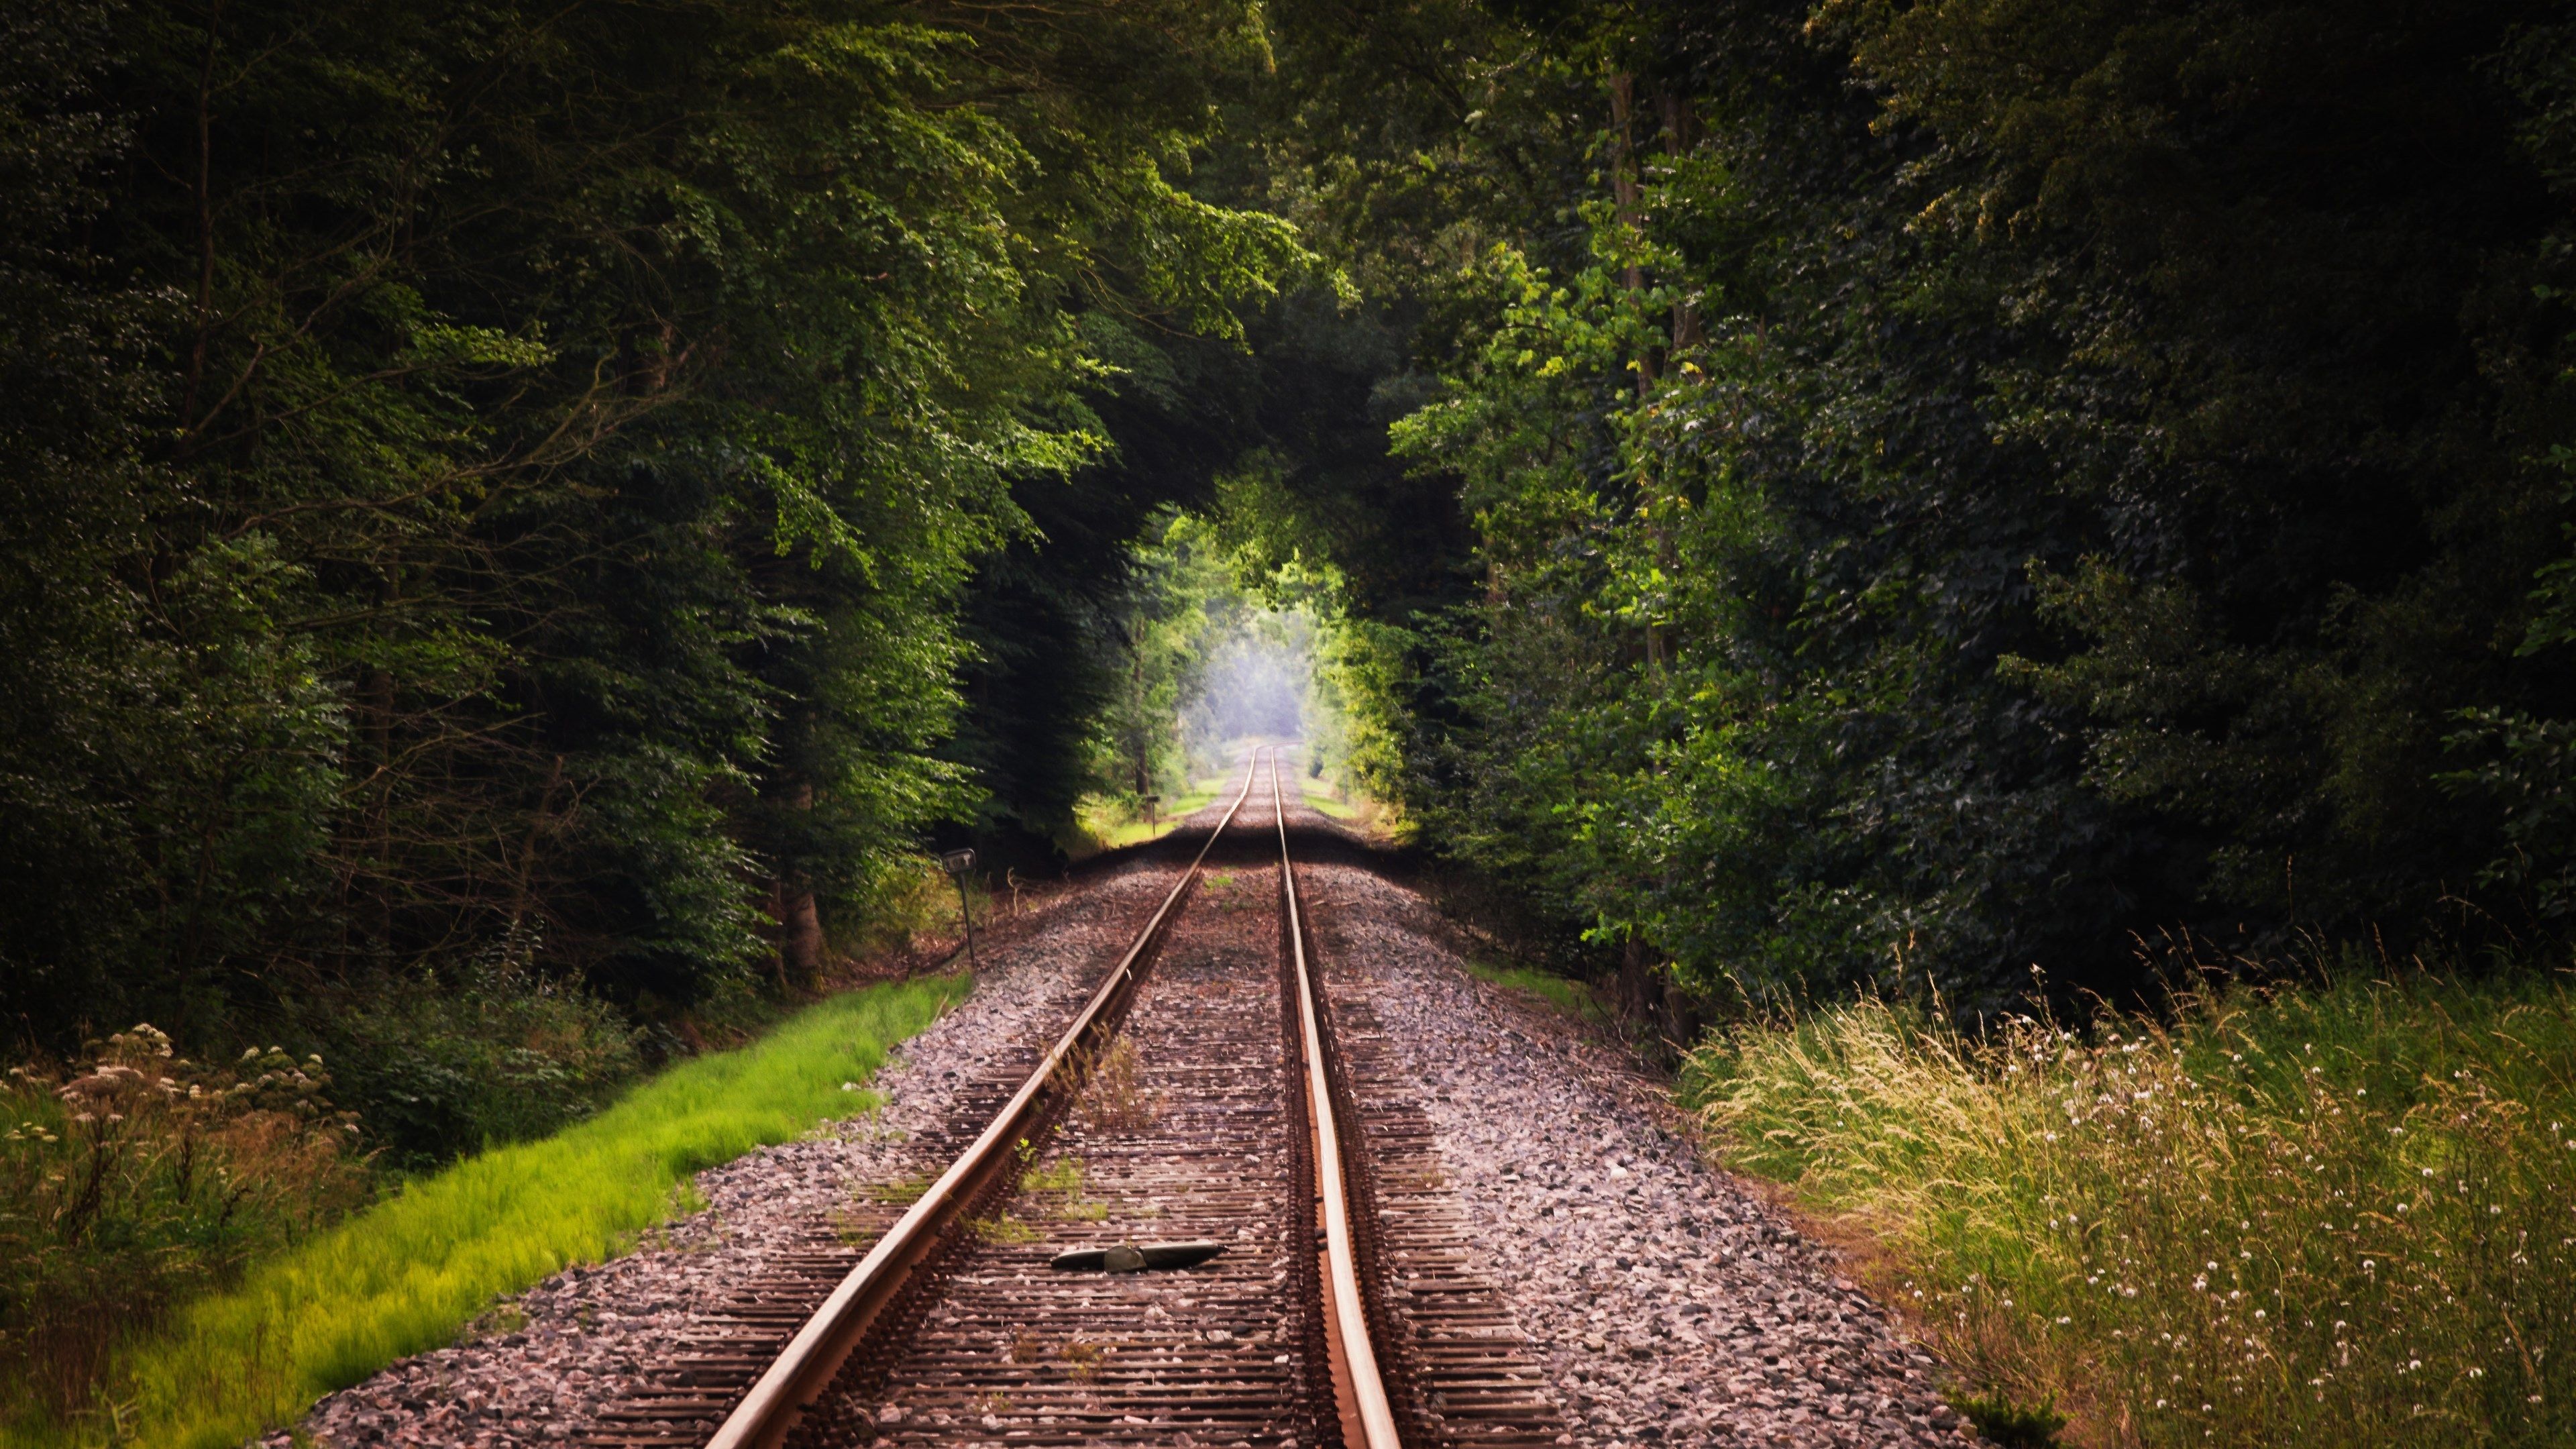 Download 3840x2160 Railroad in the forest wallpaper